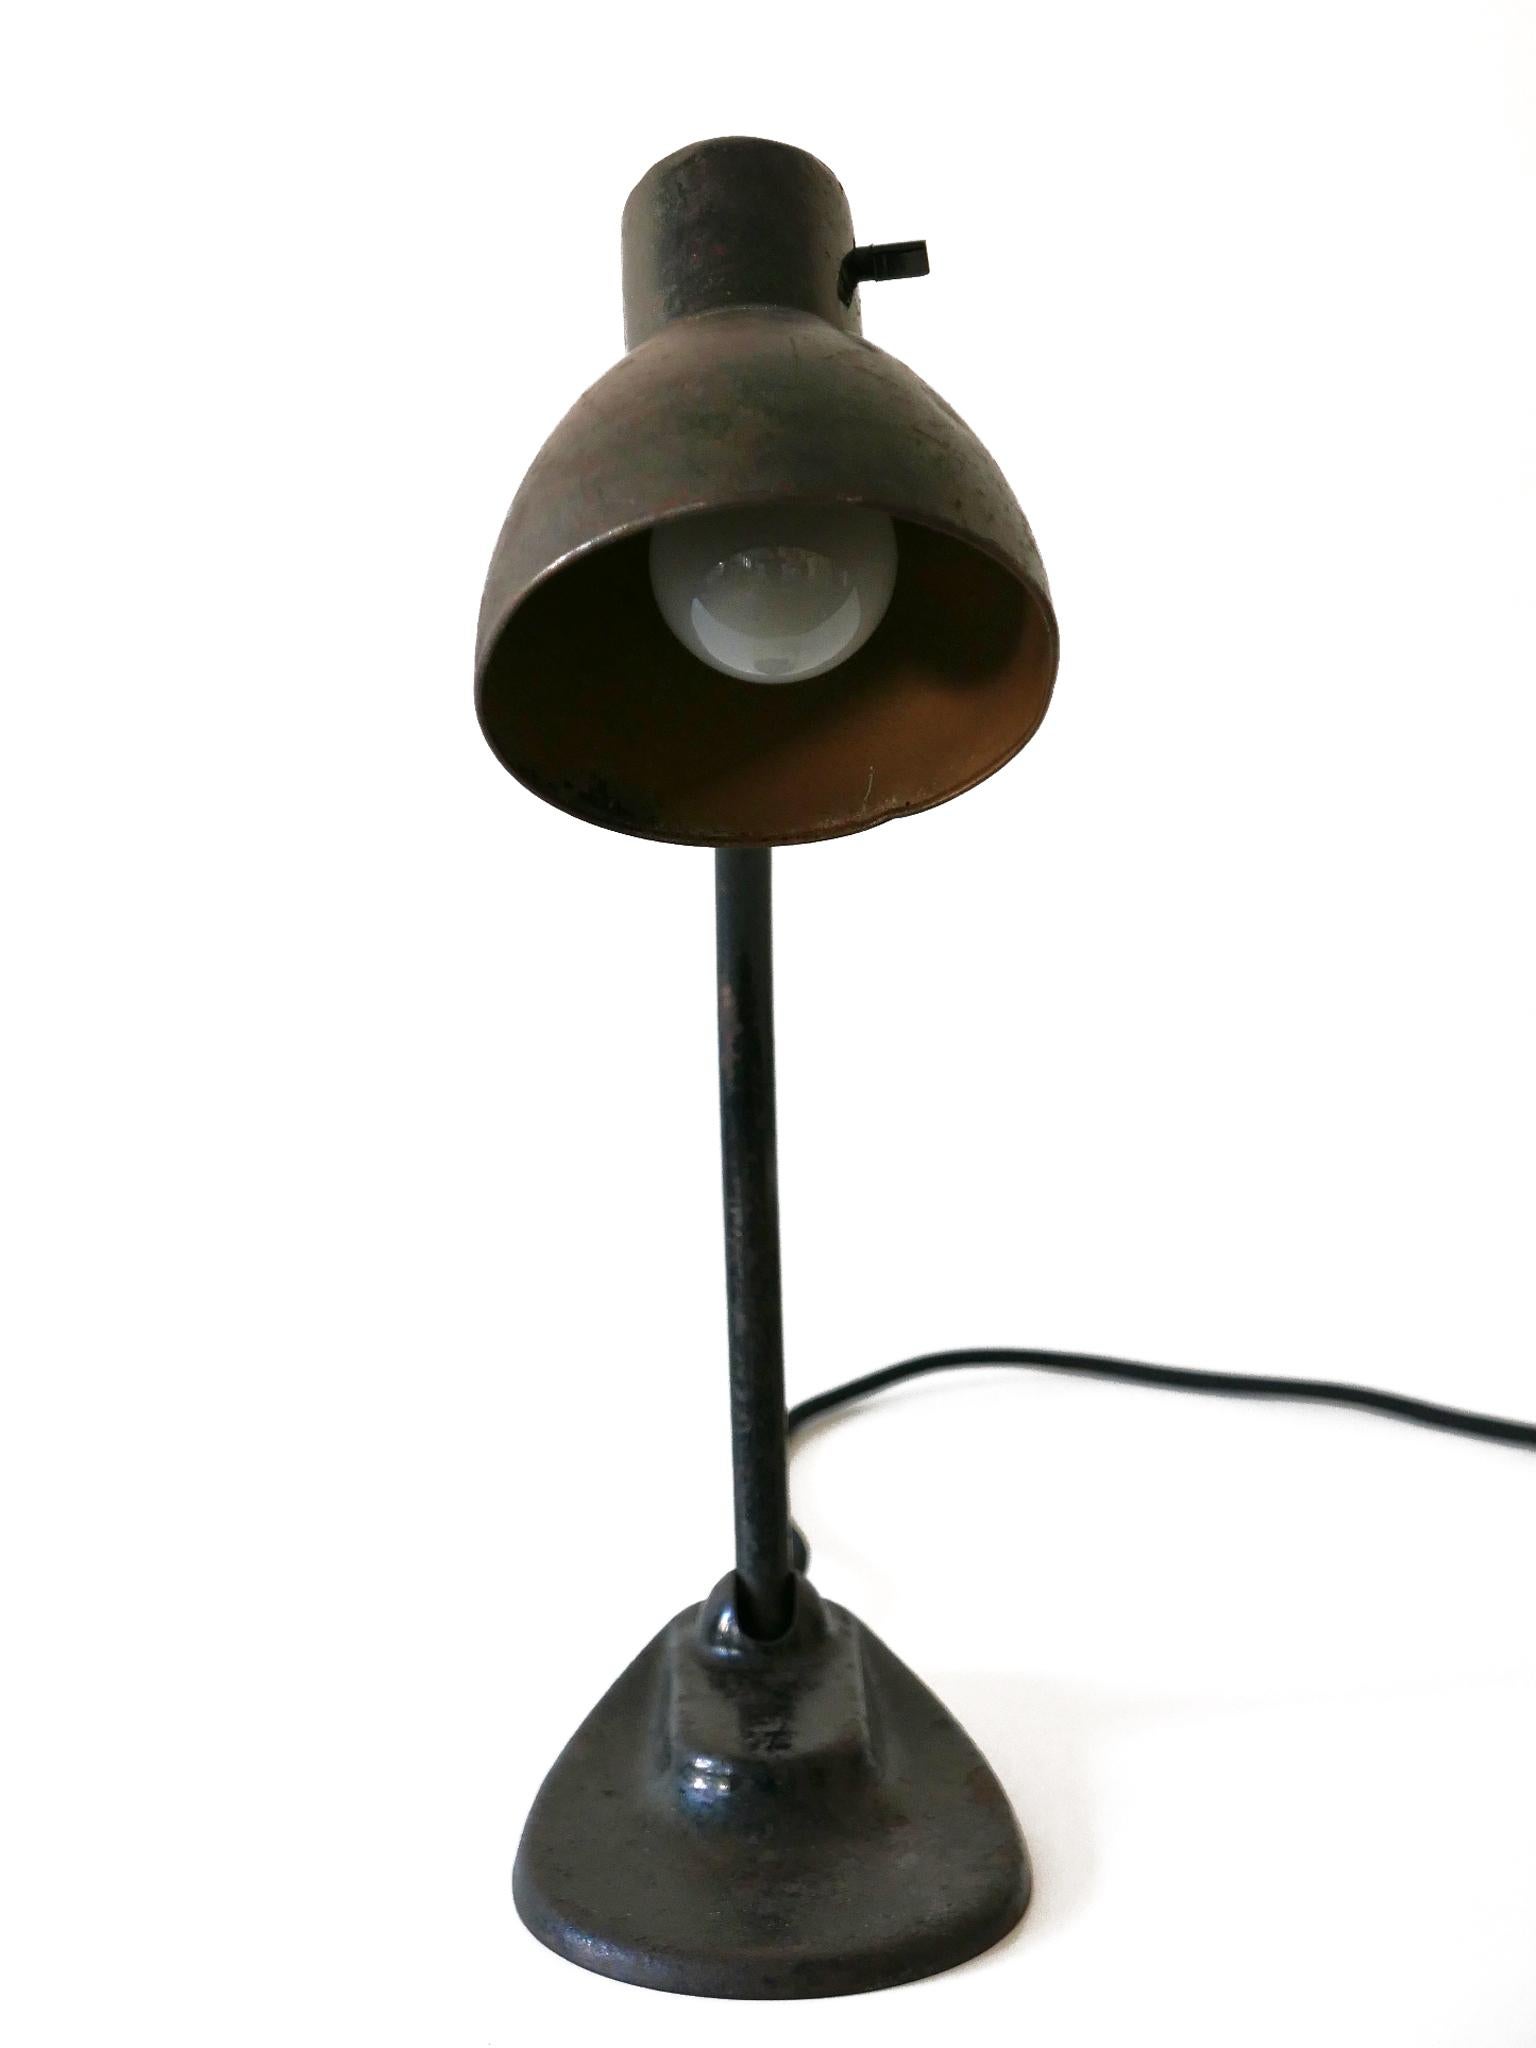 Mid-20th Century Bauhaus Table Lamp '967' by Marianne Brandt & Hin Bredendieck for Kandem, 1930s For Sale